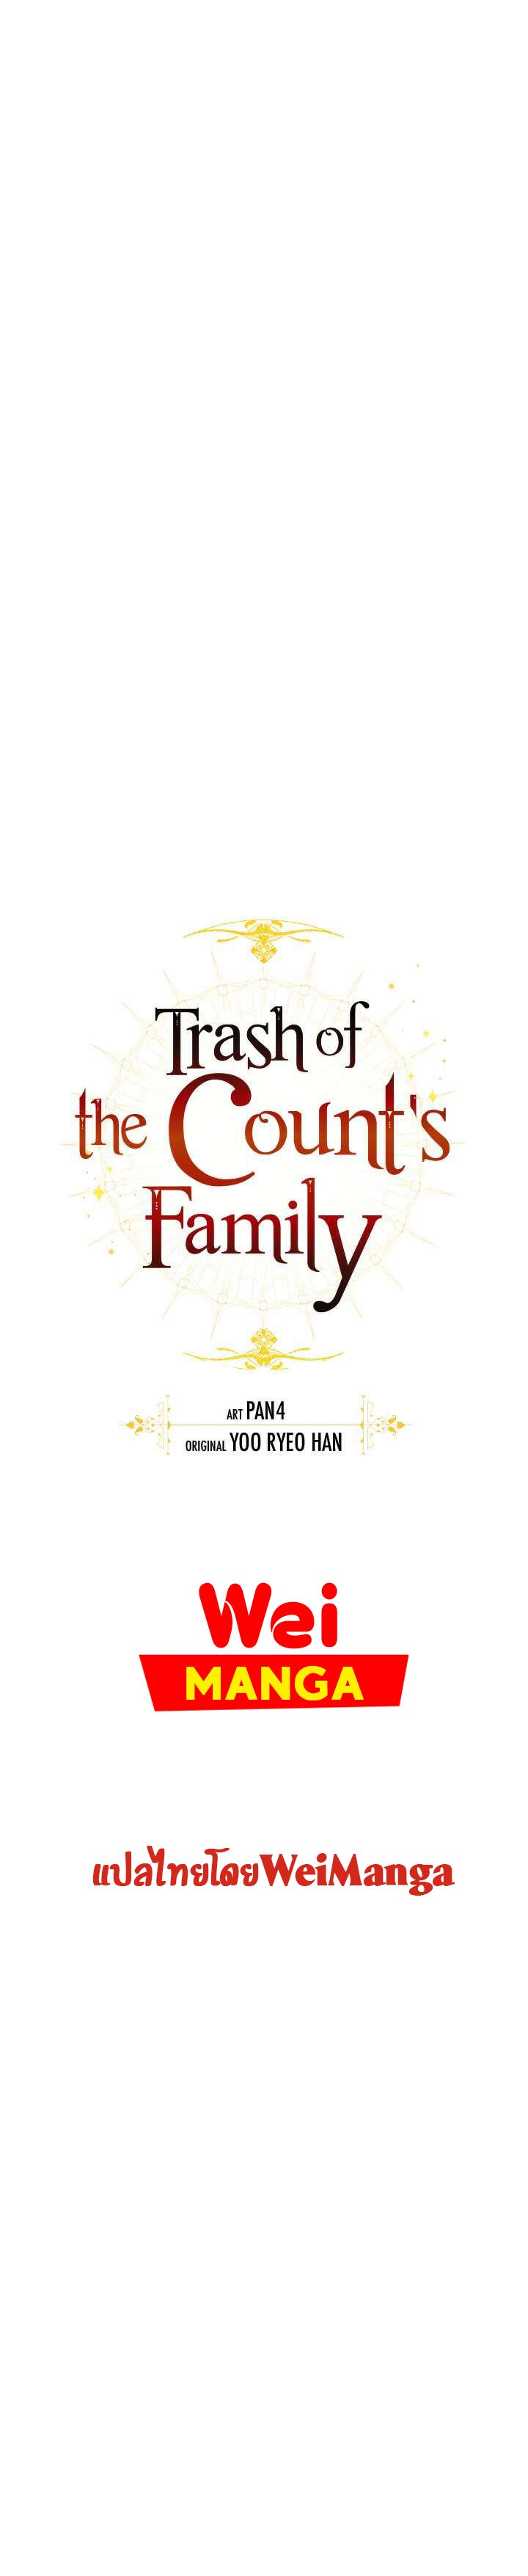 Trash of the Count’s Family 20 10